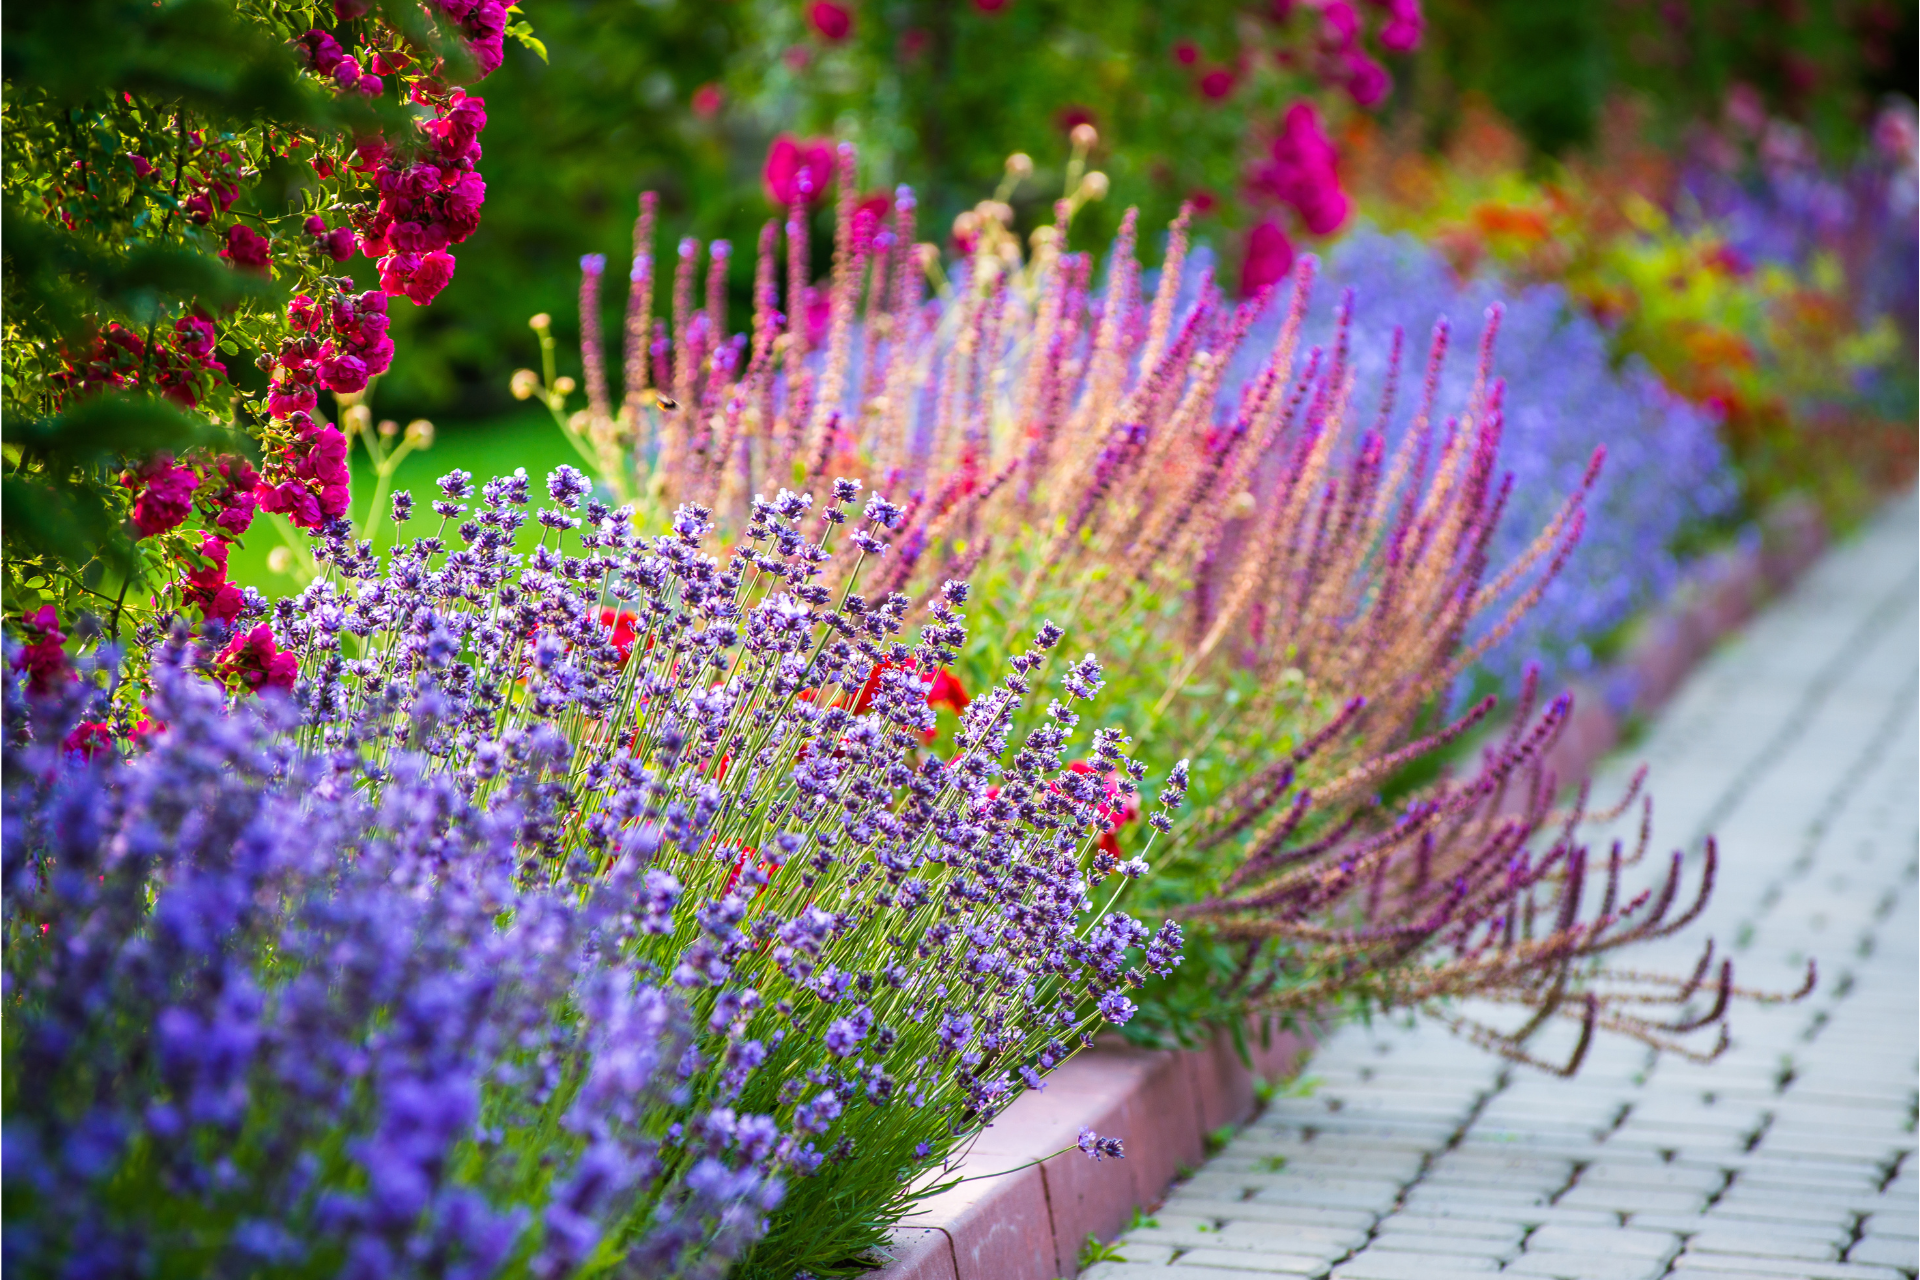 Color in Landscaping